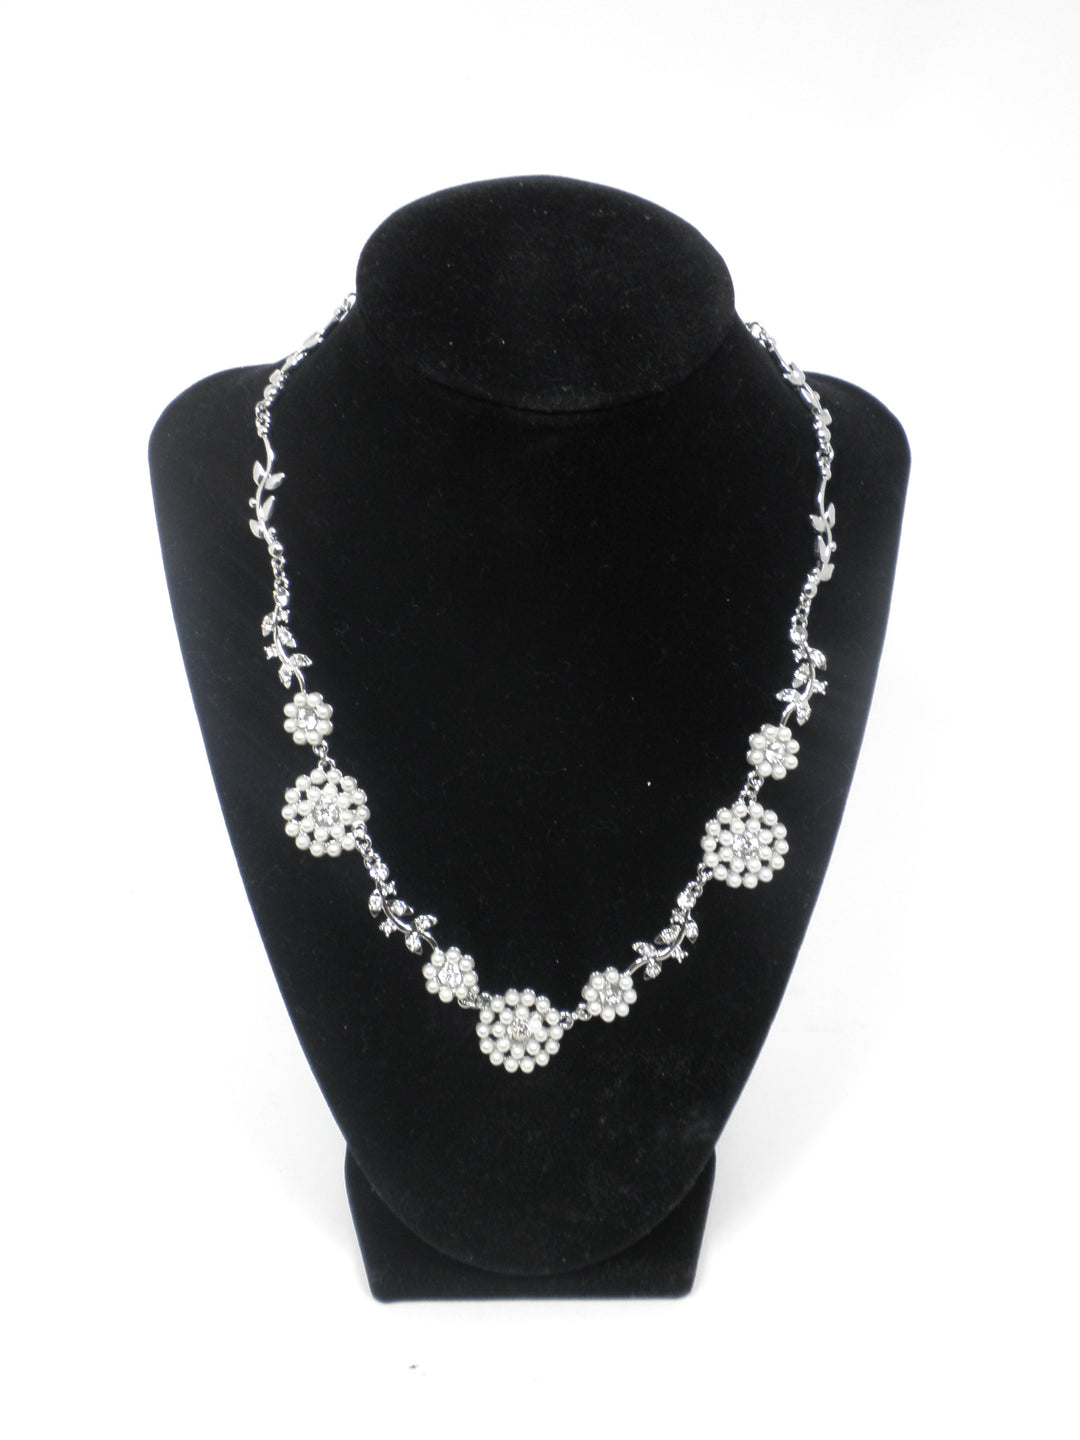 Roman Silver Pearl & Rhinestone Floral Necklace - Donated From Designer - The Fashion Foundation